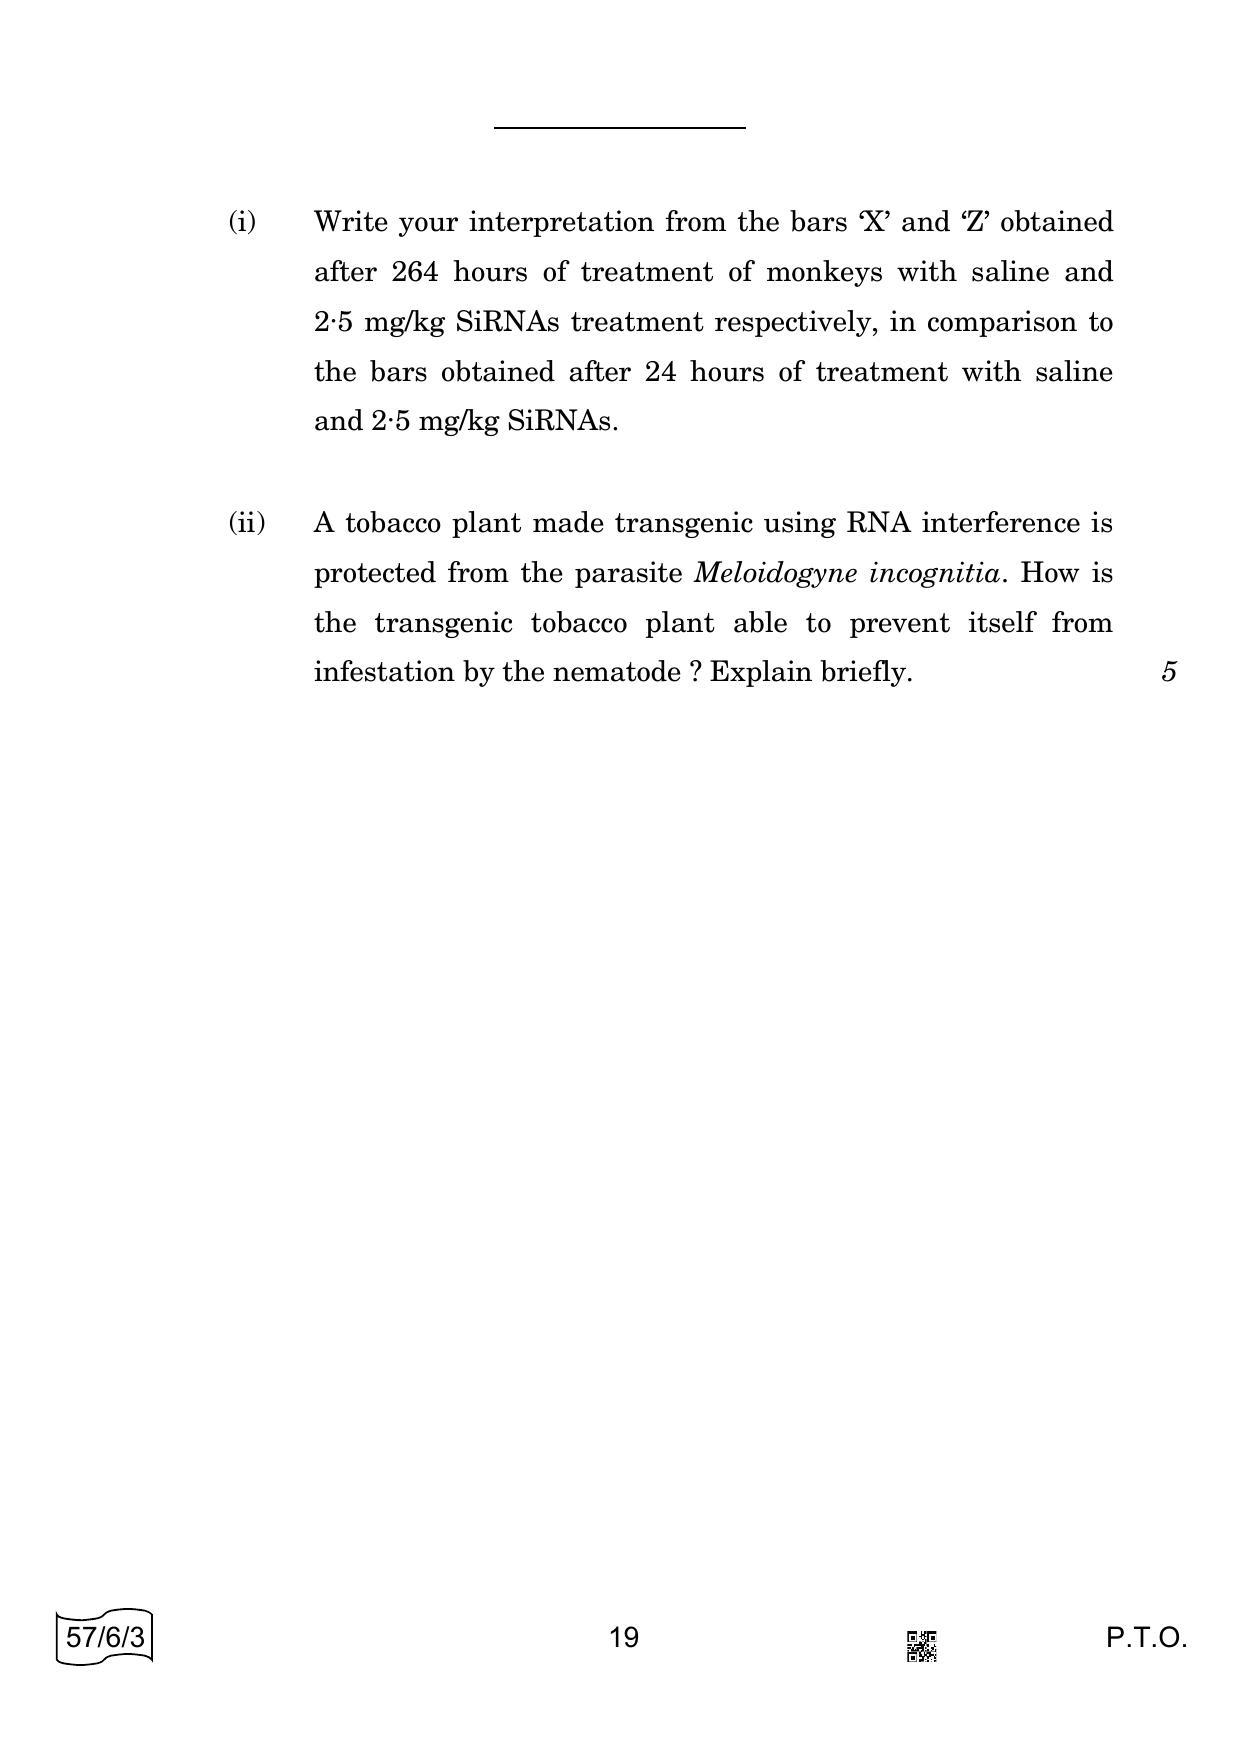 CBSE Class 12 57-6-3 BIOLOGY 2022 Compartment Question Paper - Page 19